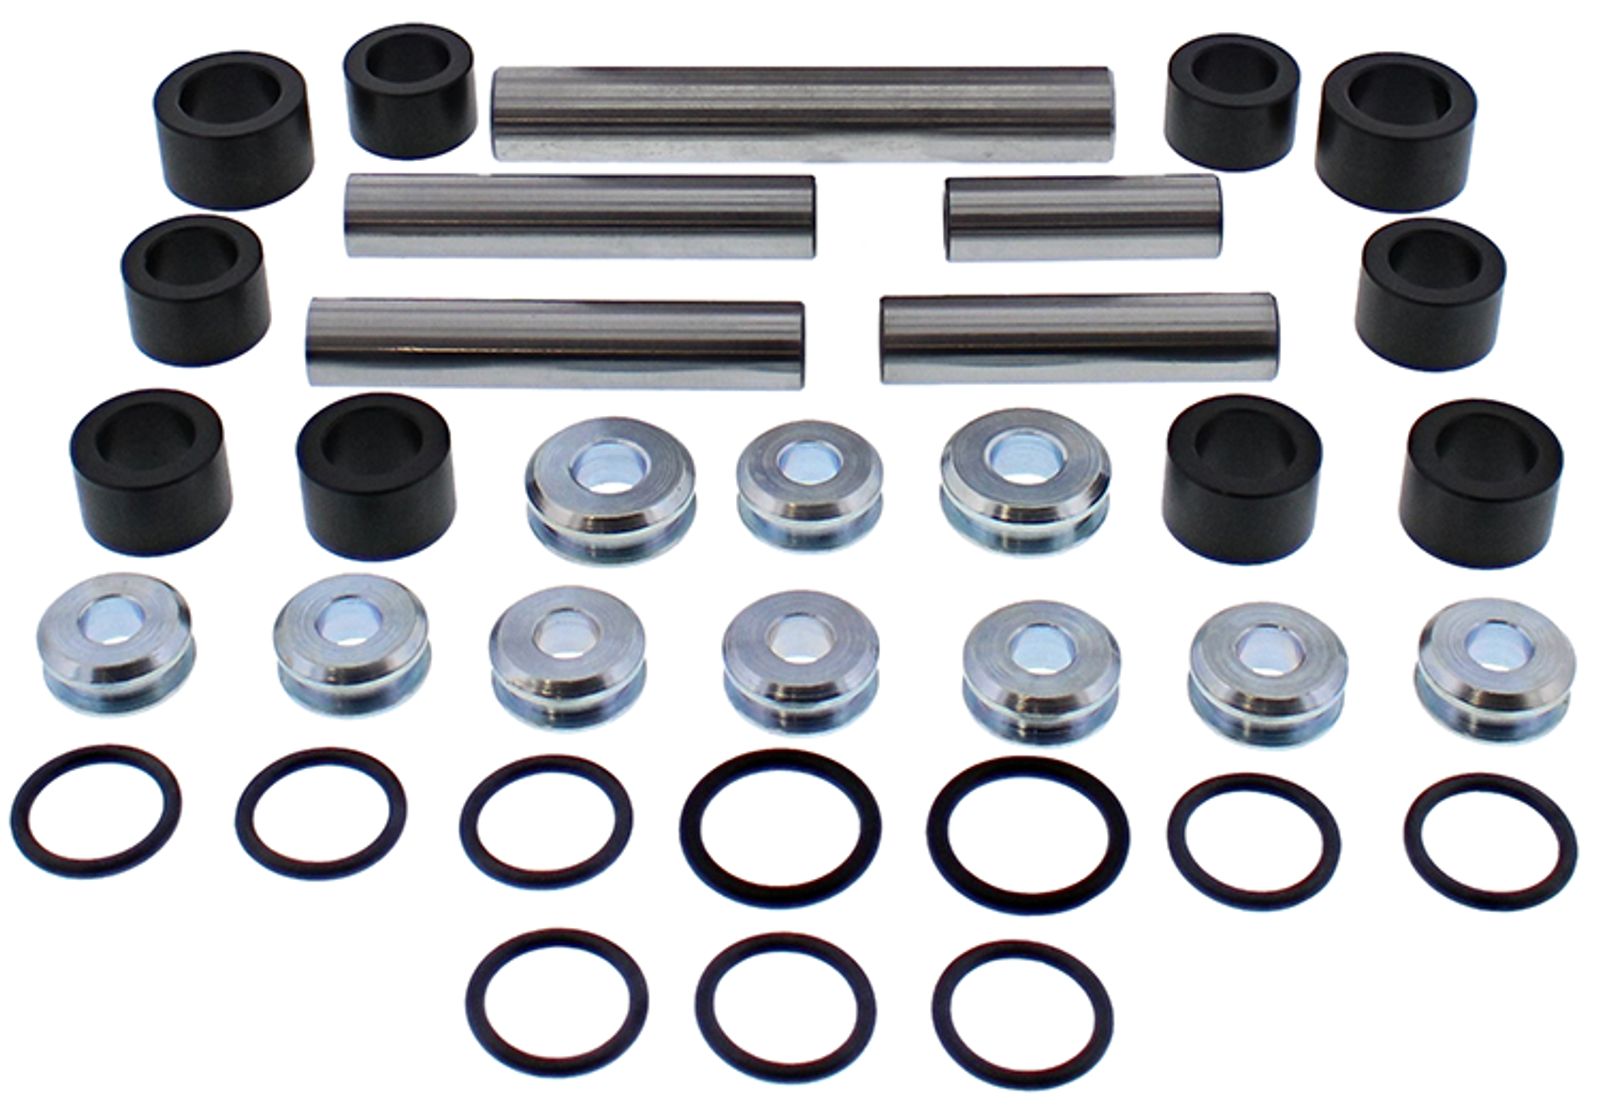 Wrp Rear Ind. Suspension Kits - WRP501177 image